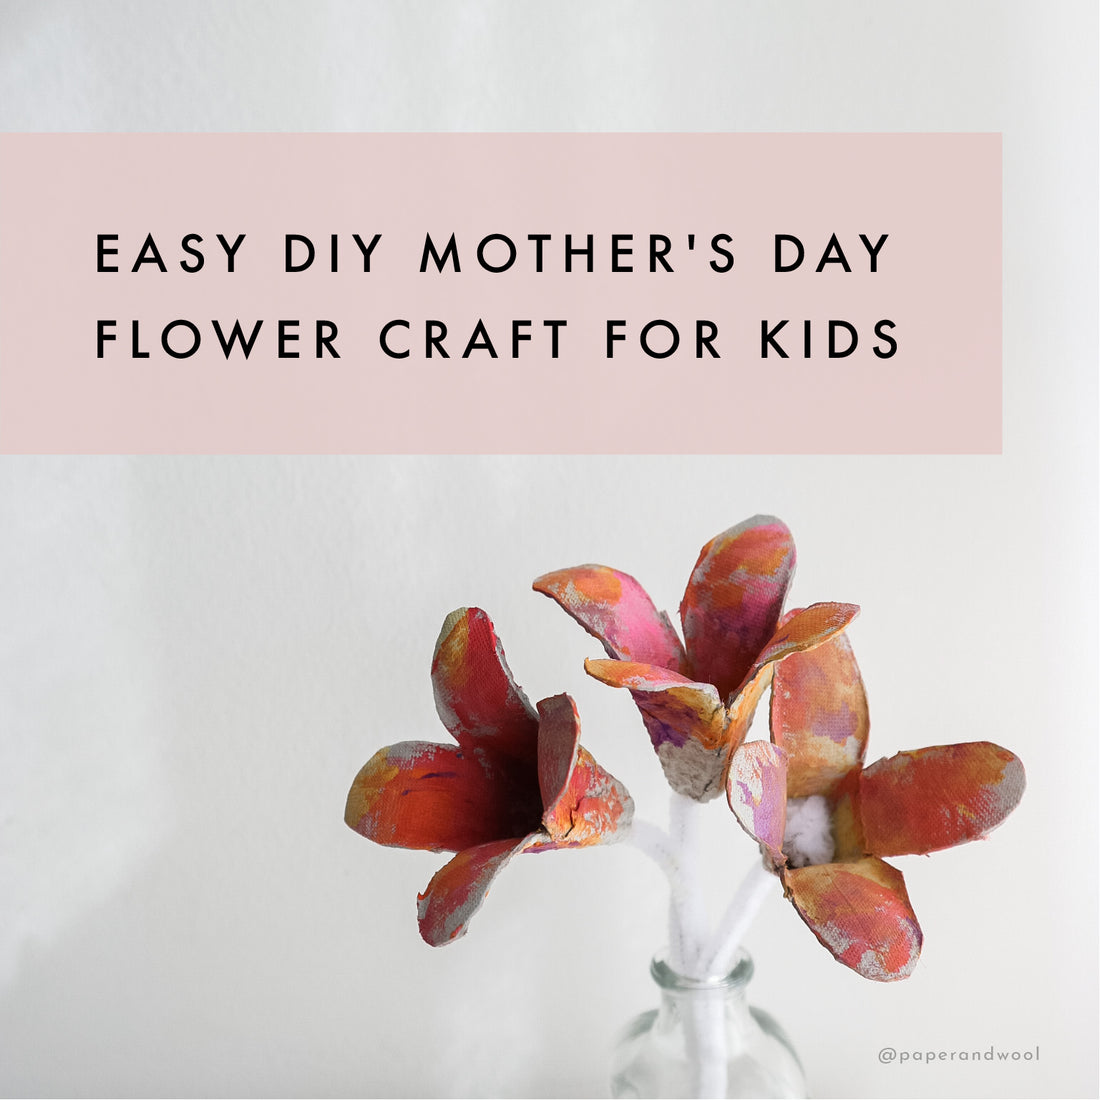 EASY DIY MOTHER'S DAY FLOWER CRAFT FOR KIDS